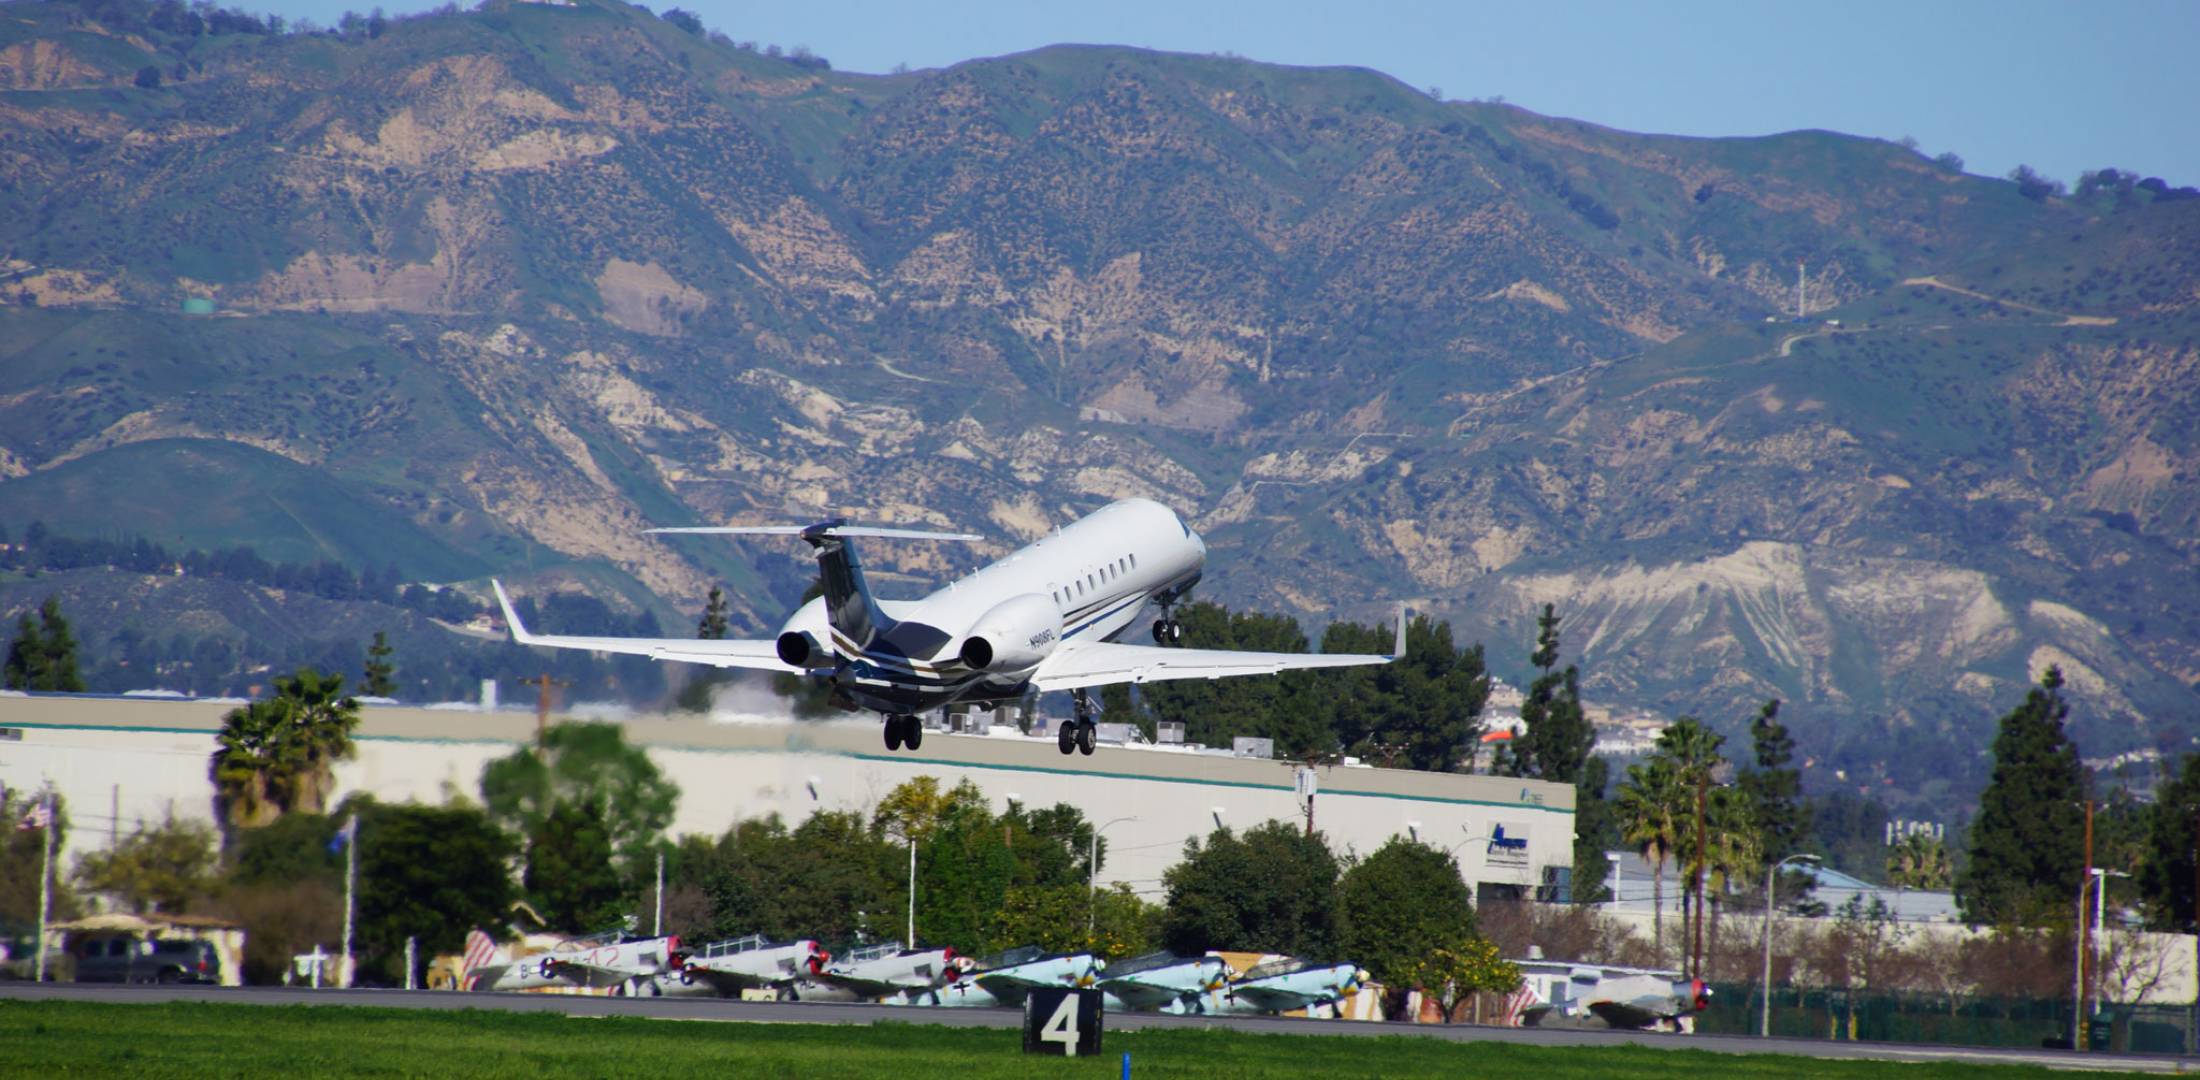 Business jet taking off from airport near mountains 